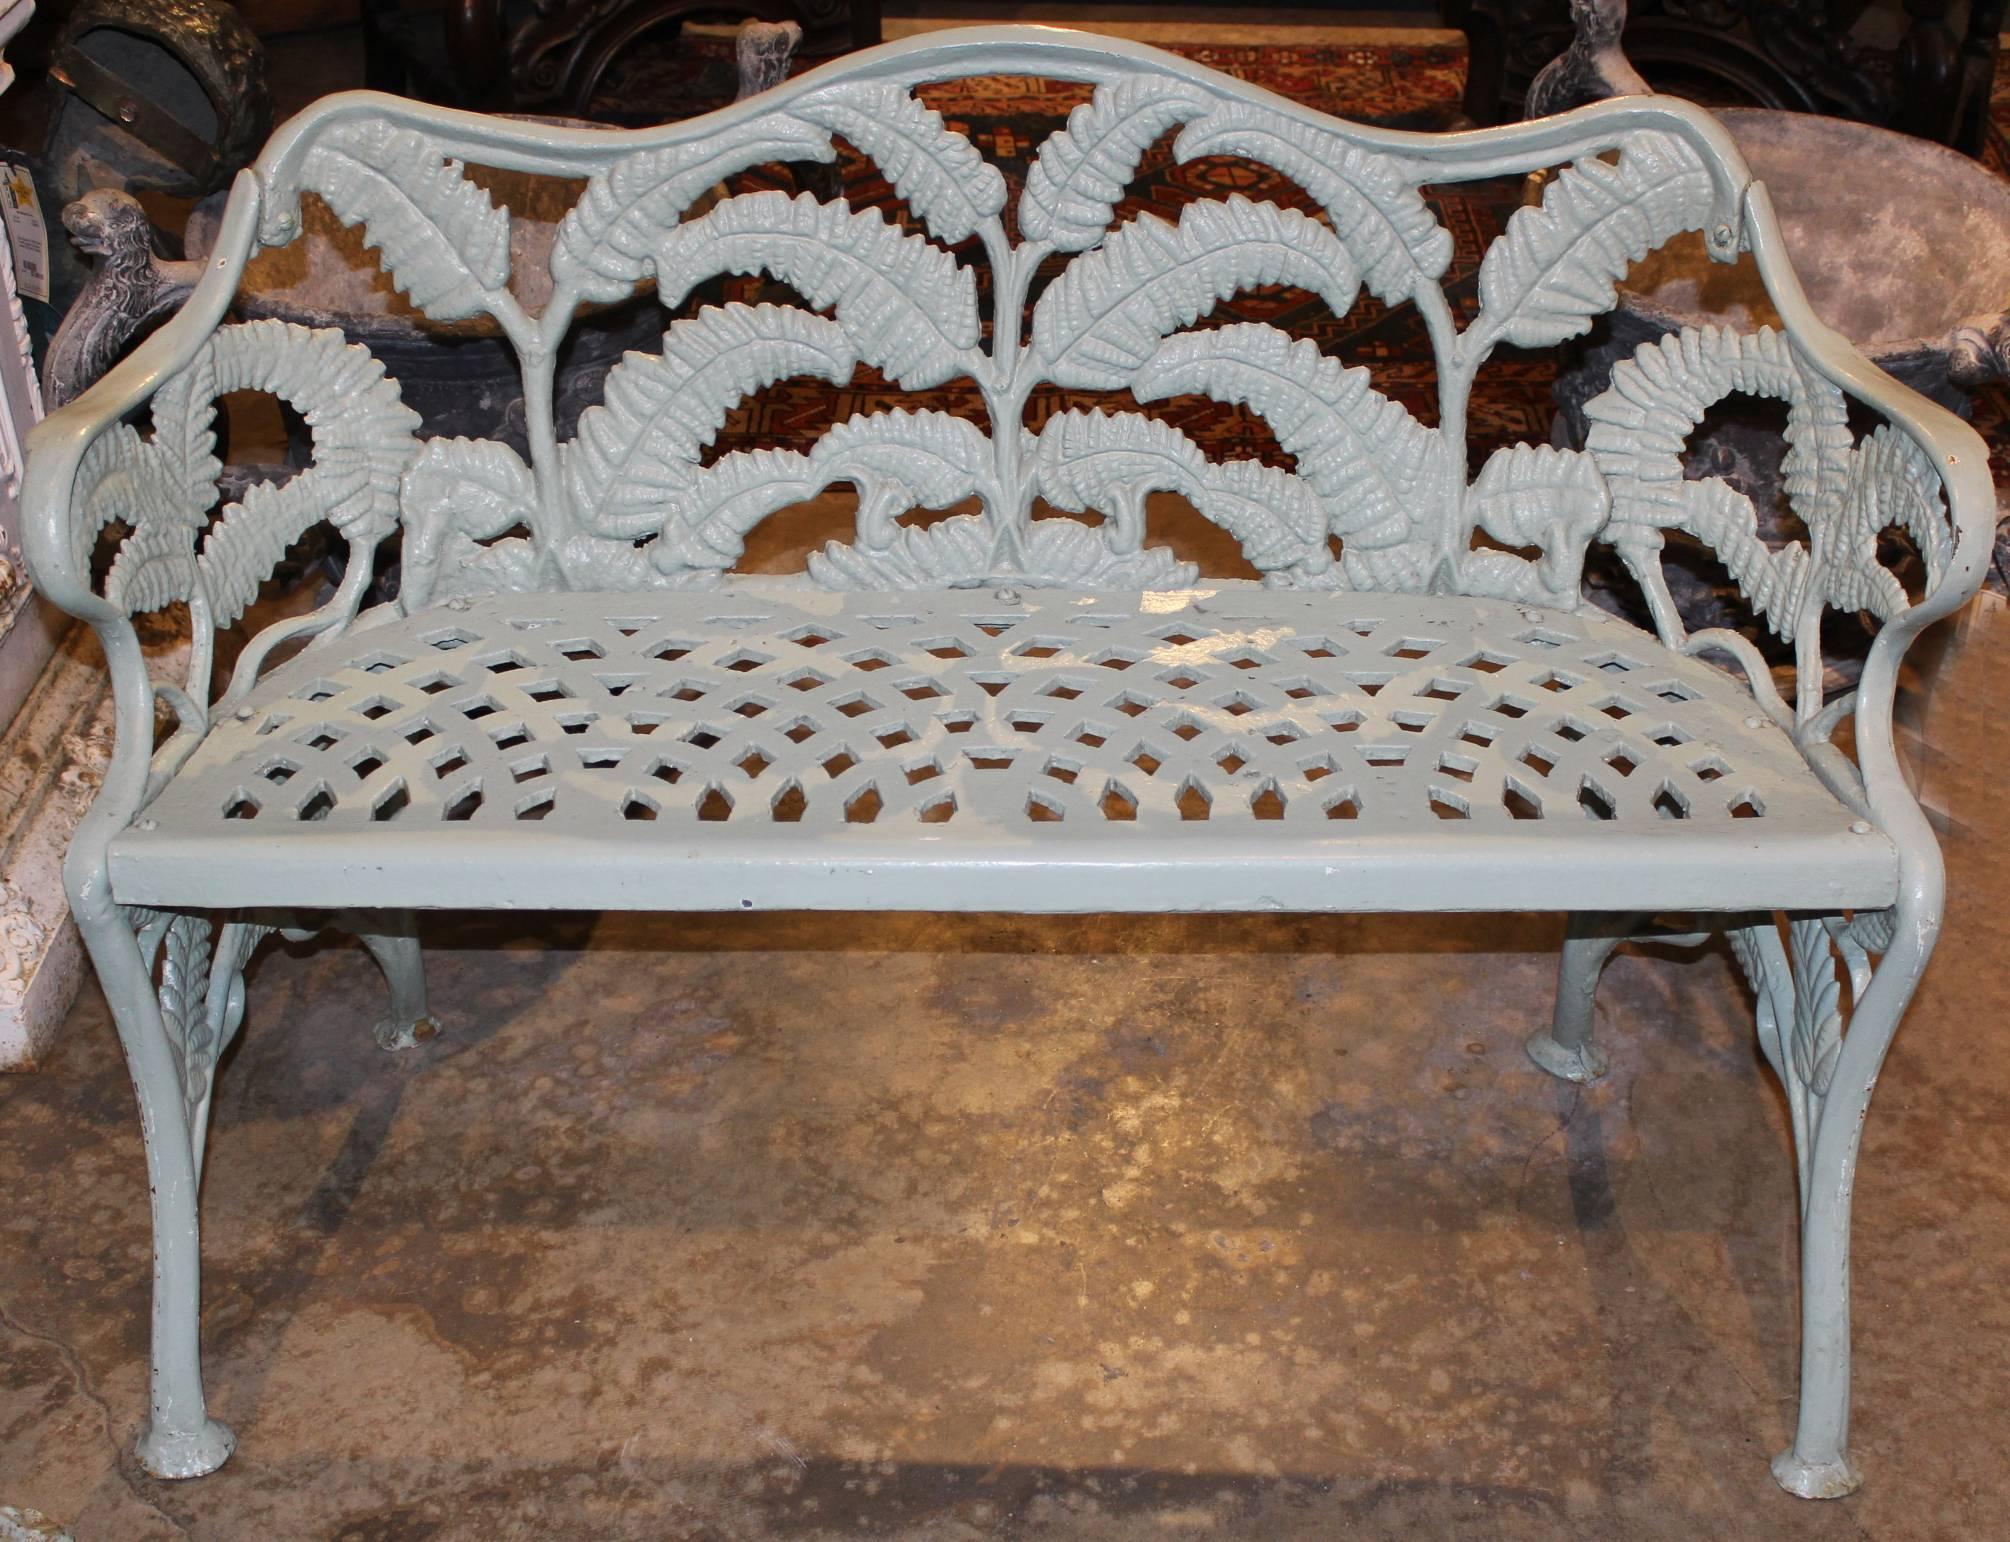 A heavy assembled set of cast iron garden furniture consisting of a Victorian settee and armchair with fern and scroll motif, along with a later round tripod side table with grapevine motif, all painted in celadon green,. Unsigned in very good